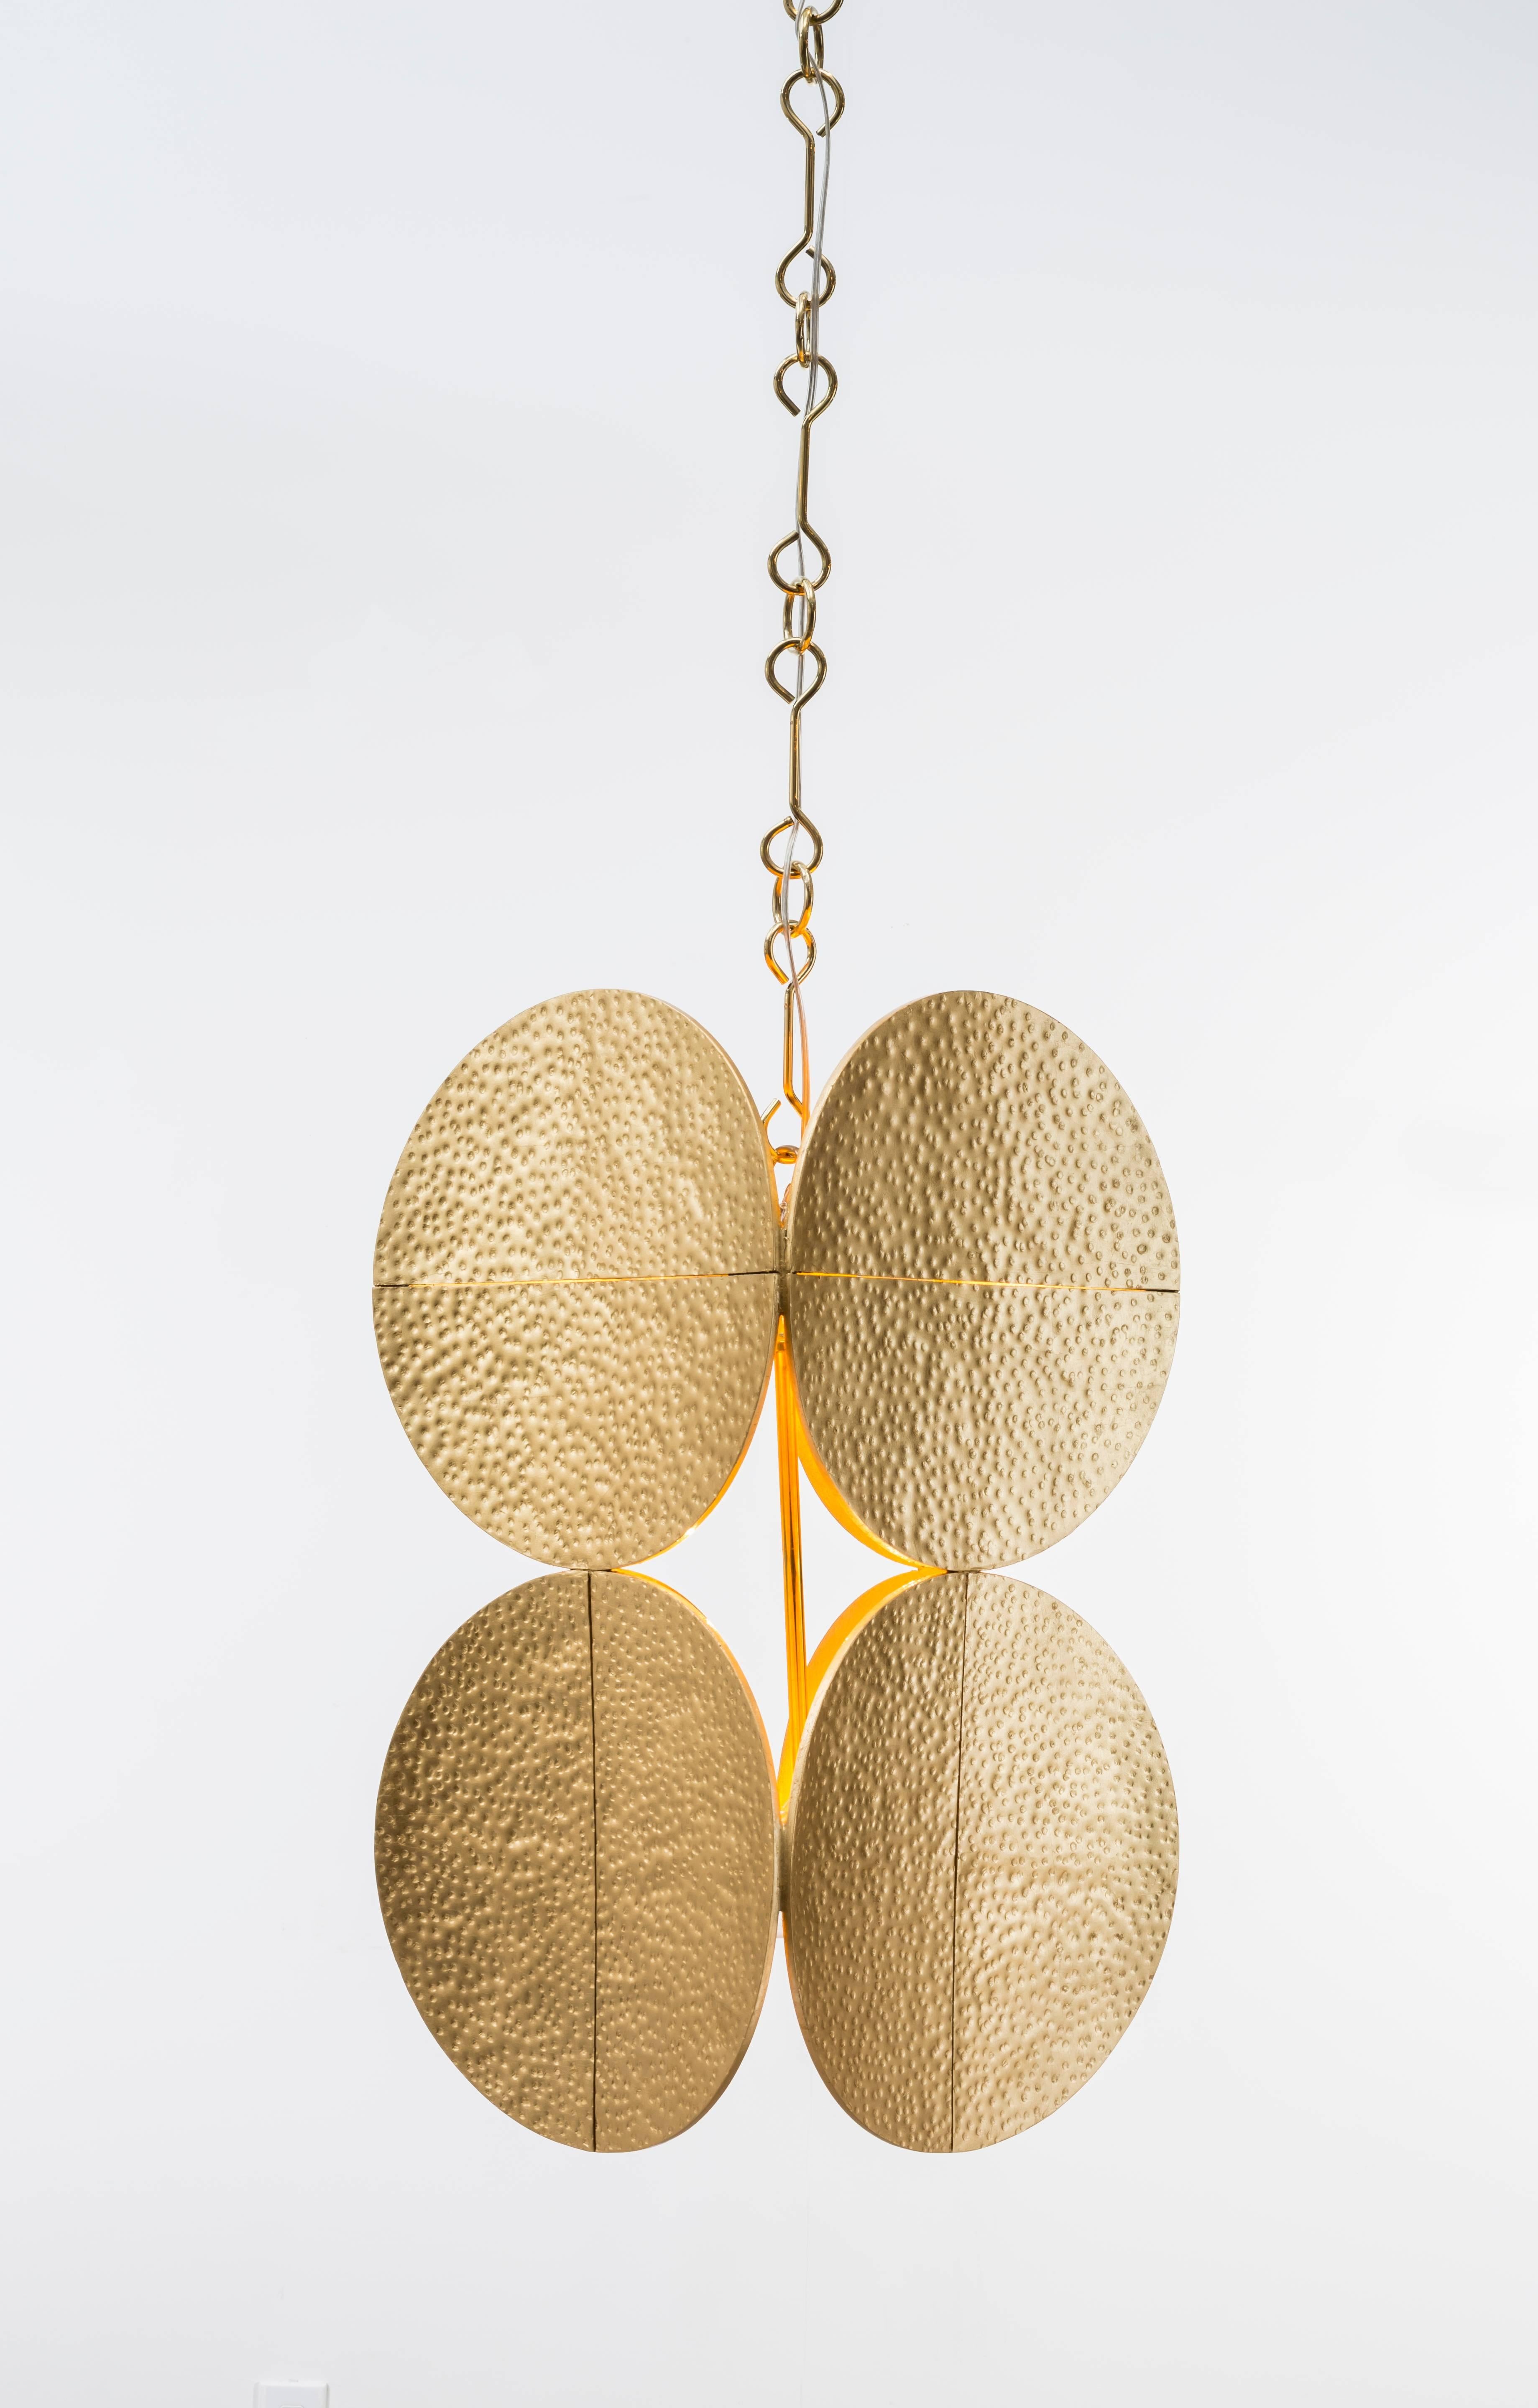 HALO PENDANT - Modern Gold Leaf Chandelier with Brass Chain

The Halo Chandelier is a stunning piece of functional art that will add a touch of elegance and sophistication to any interior. It features gold leaf Halo's suspended from a decorative